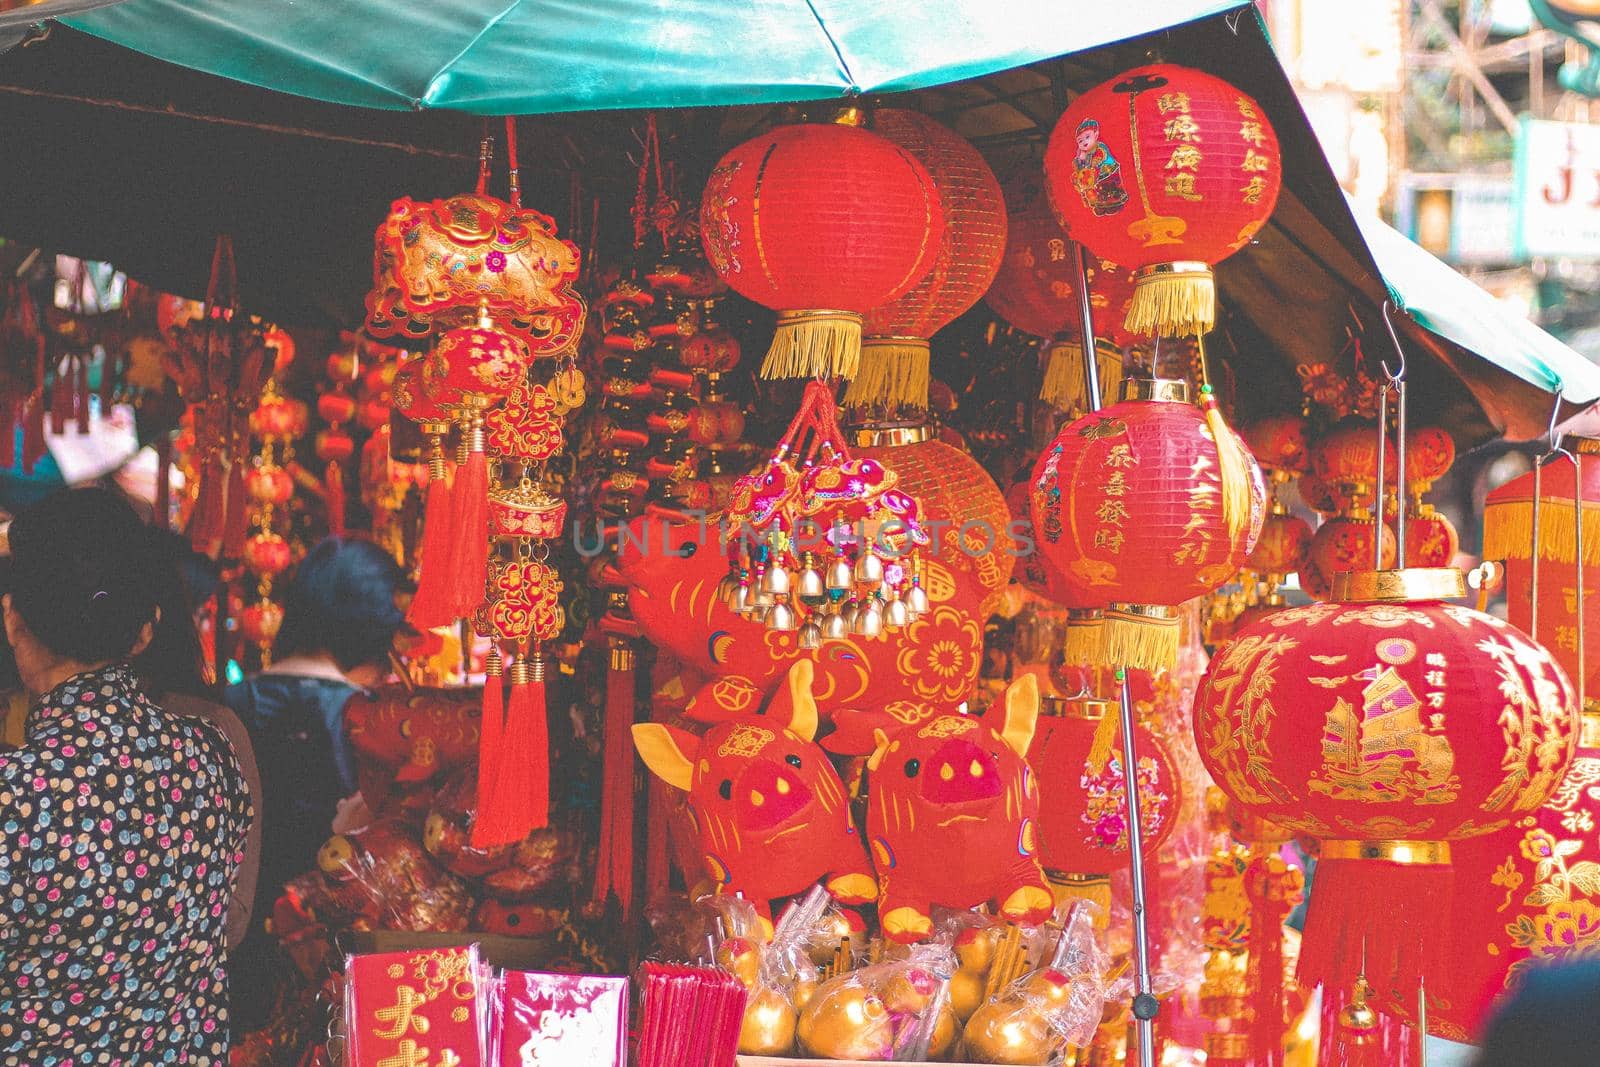 Chinese lanterns sold in Chinatown for the Lunar New Year celebration